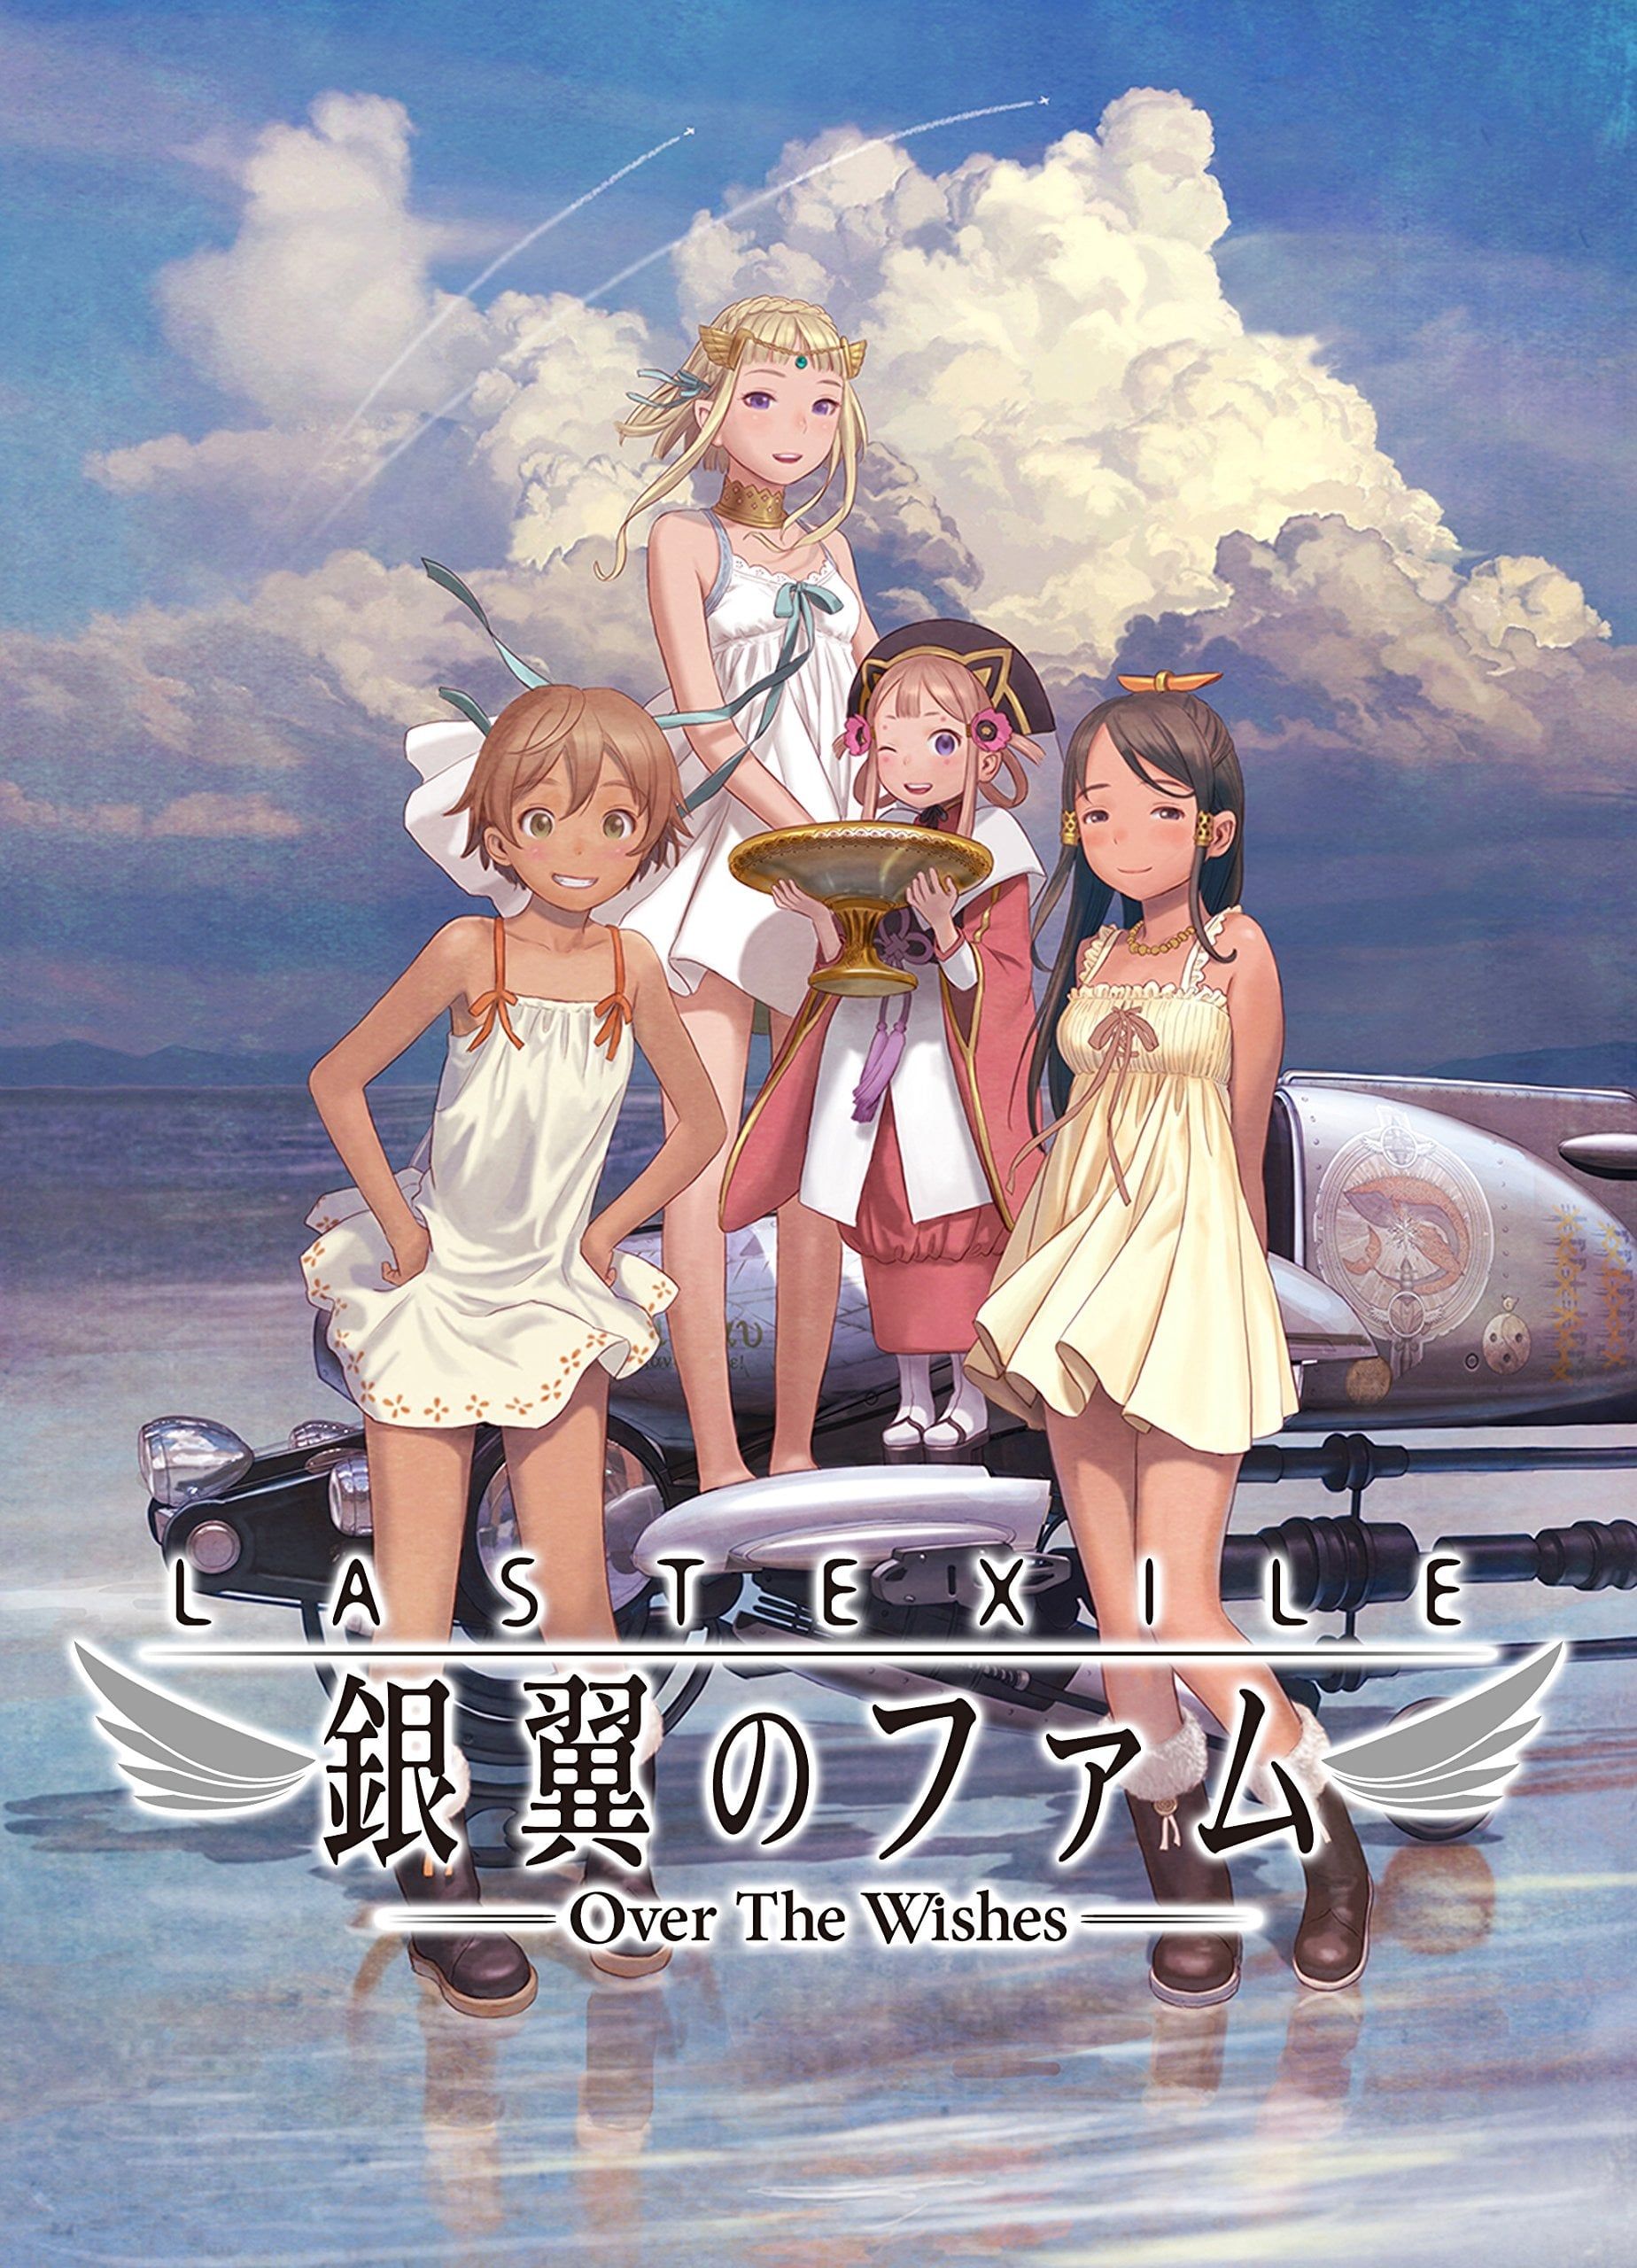 Last Exile: Ginyoku no Fam Movie - Over the Wishes - MOVIE (Movie) (Sub) Part 2